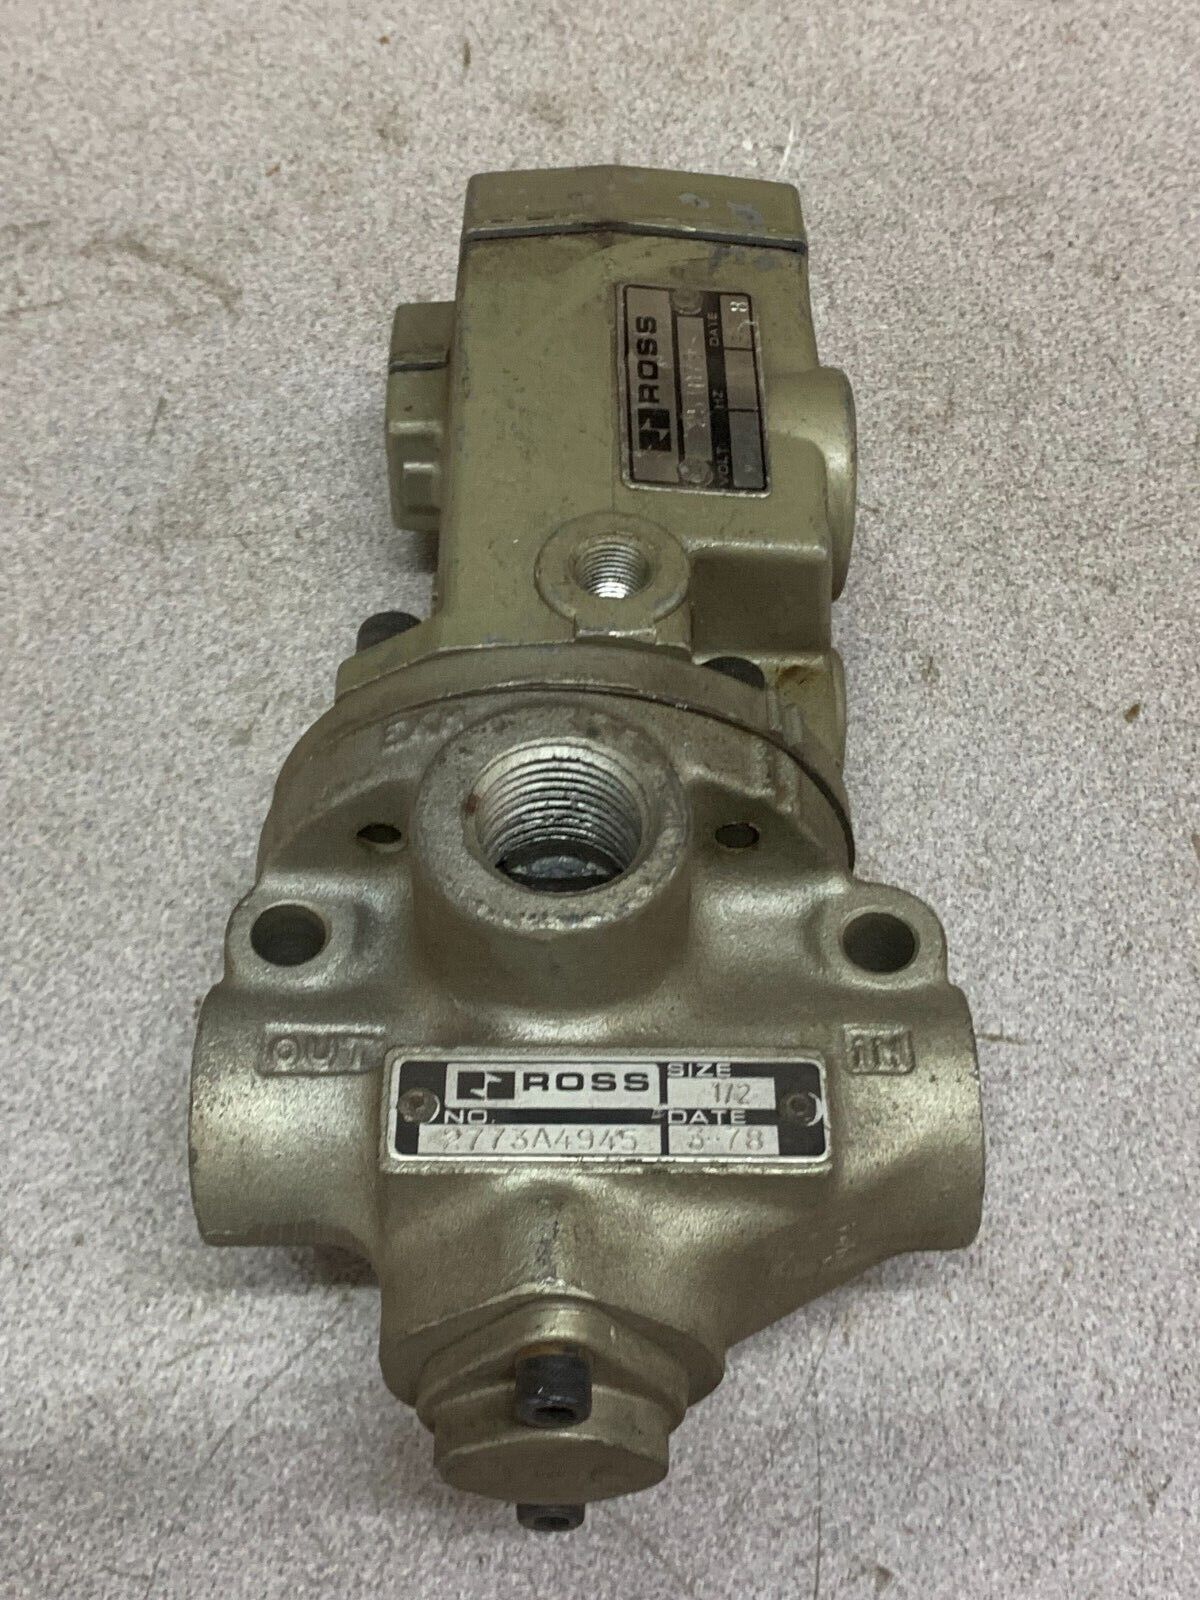 USED ROSS 1/2" PNEUMATIC VALVE 2773A4945 WITH 251H79